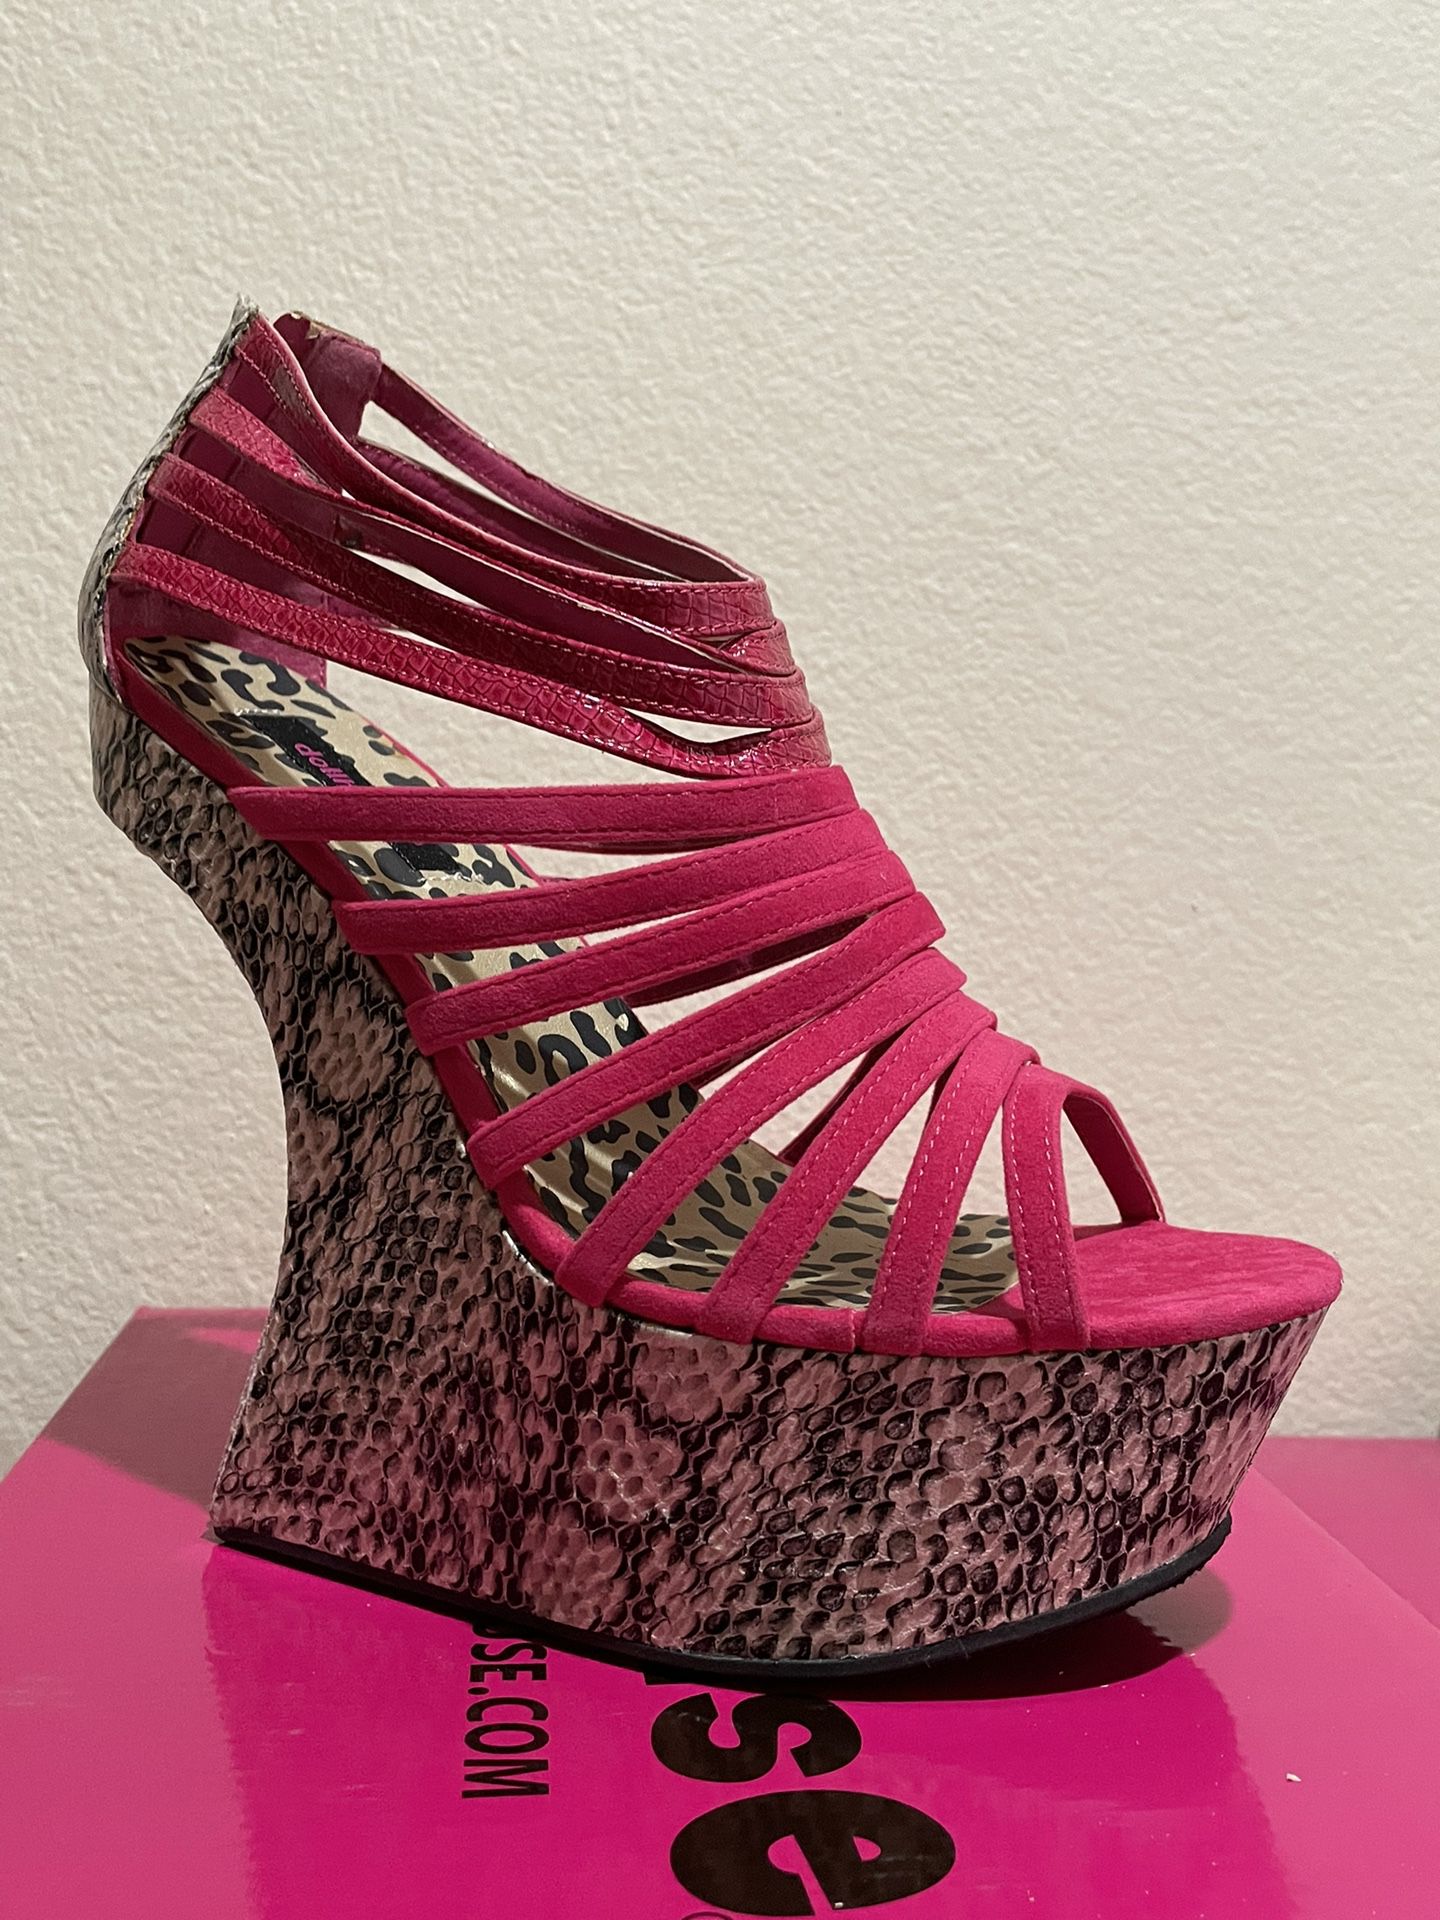 Womens SIN Pink High Heel Dollhouse Shoes Sizes 6, 6.5, 7, 7.5, 8, 8.5 And 9 Available 